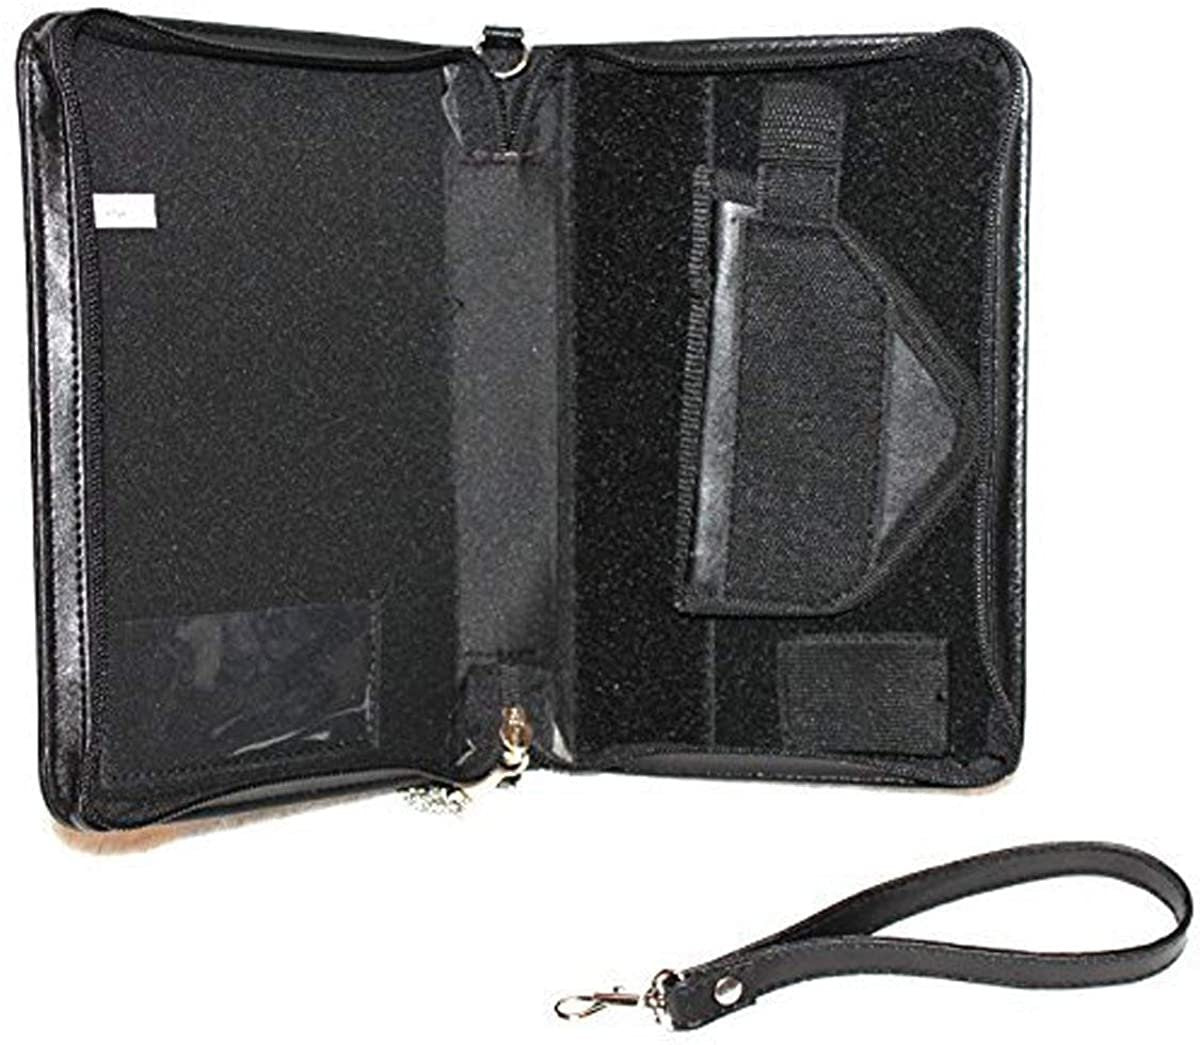 Black Cowhide Leather Concealed Carry Organizer Handgun Pistol Concealment Bible Cover Disguise CCW Case with Hand Strap